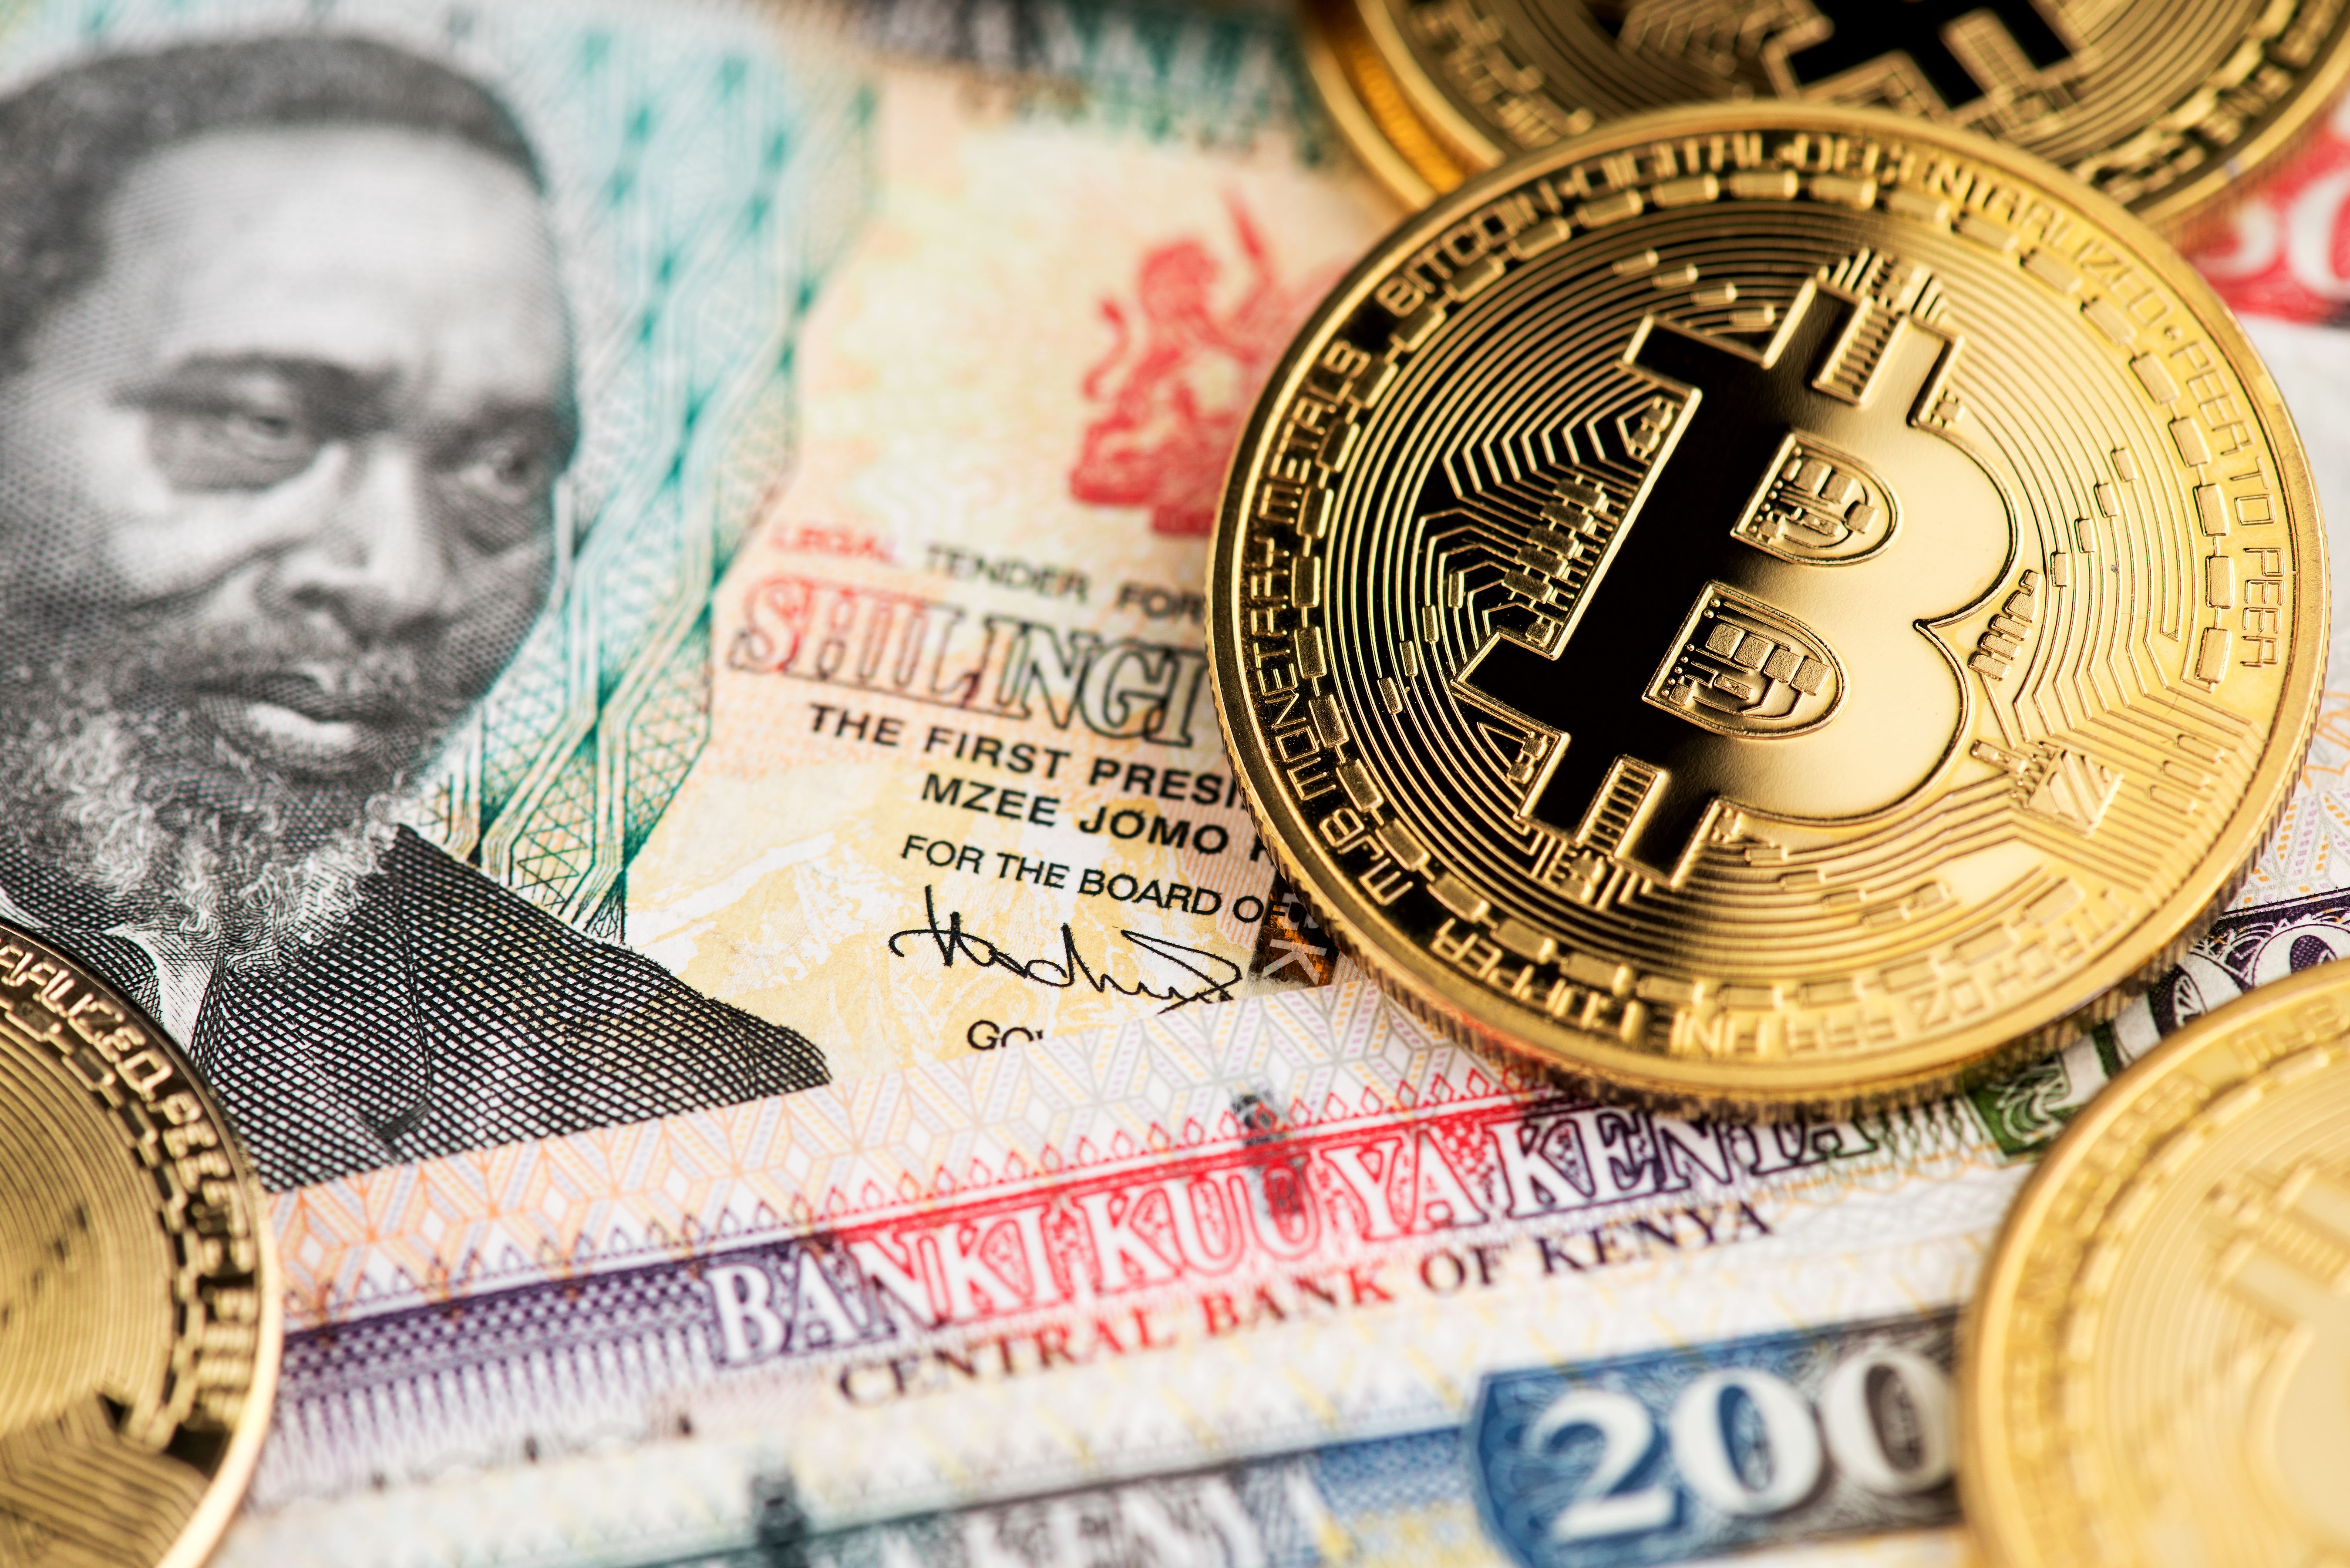 Kenyan Shilling Banknotes and Bitcoin Cryptocurrency coins close up image